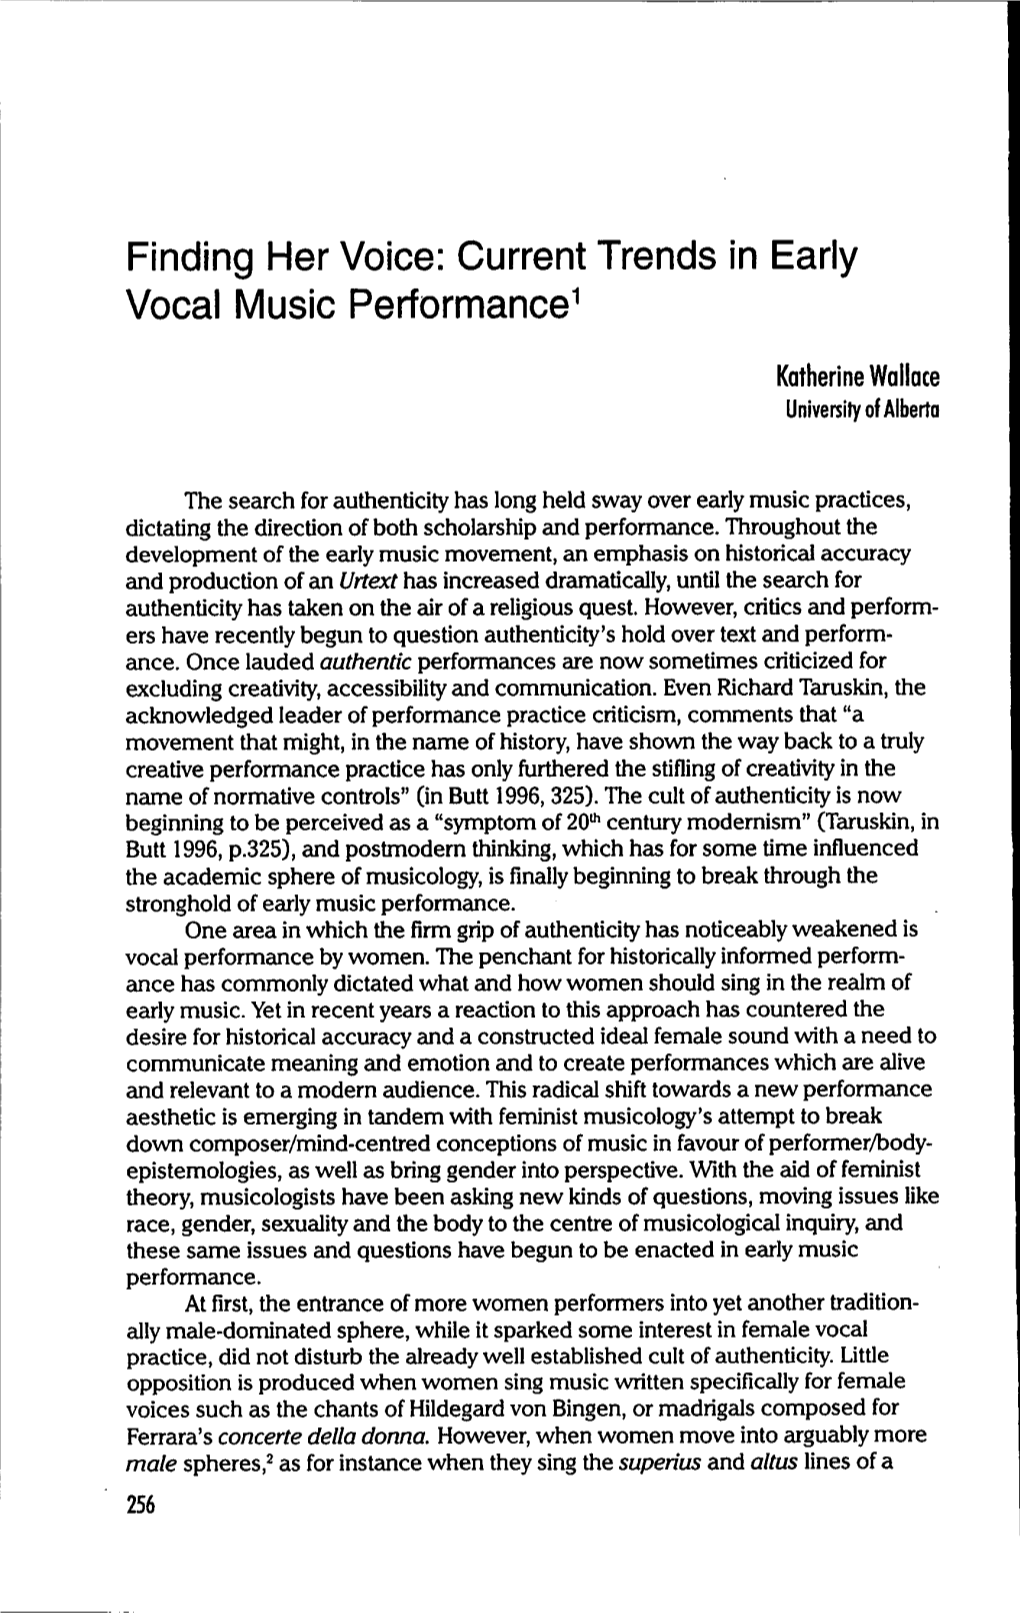 Finding Her Voice: Current Trends in Early Vocal Music Performance 1